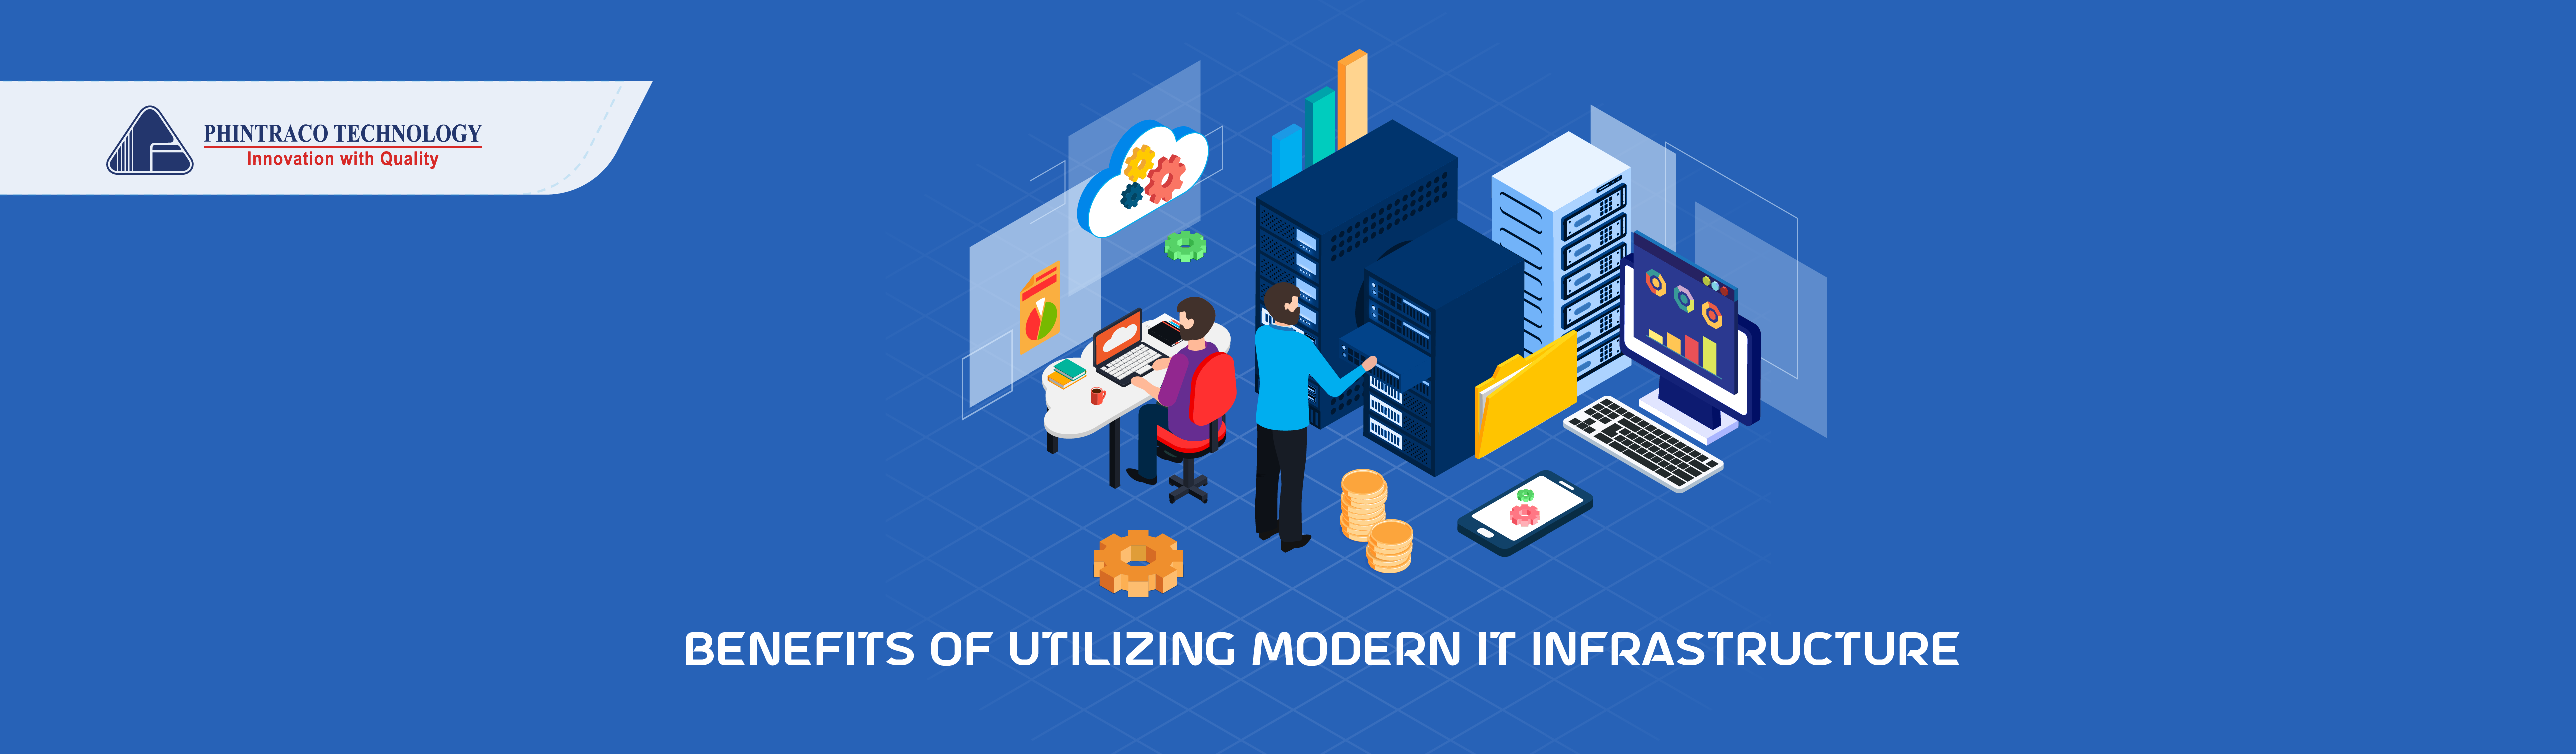 Benefits of Using Modern IT Infrastructure